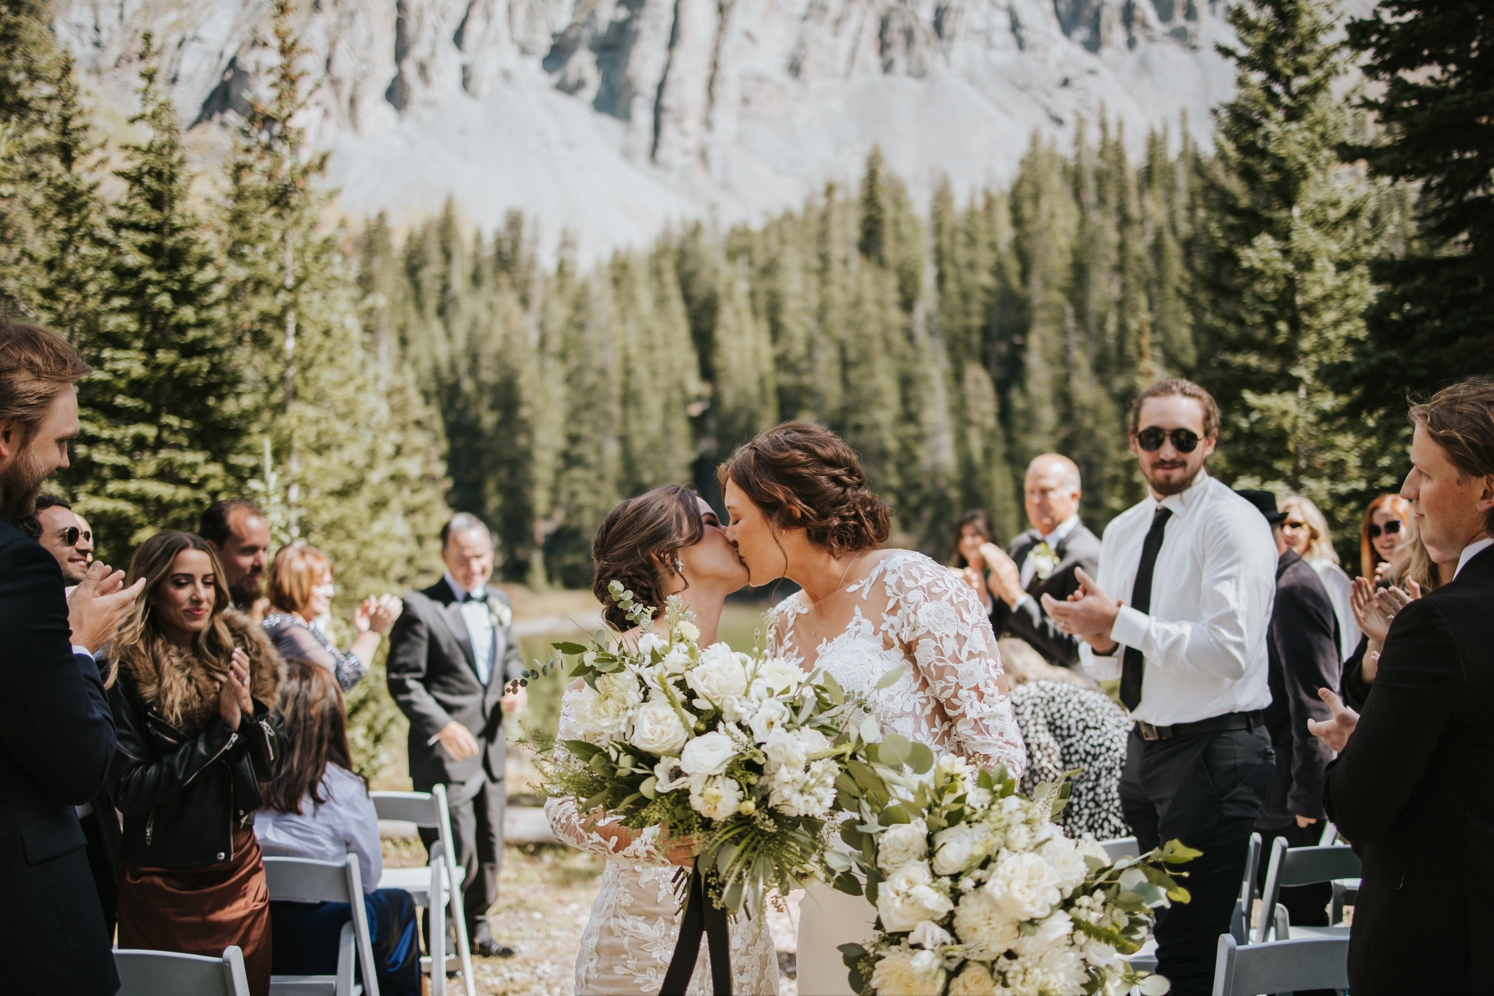 Brides kissing after wedding ceremony in Telluride | McArthur Weddings and Events